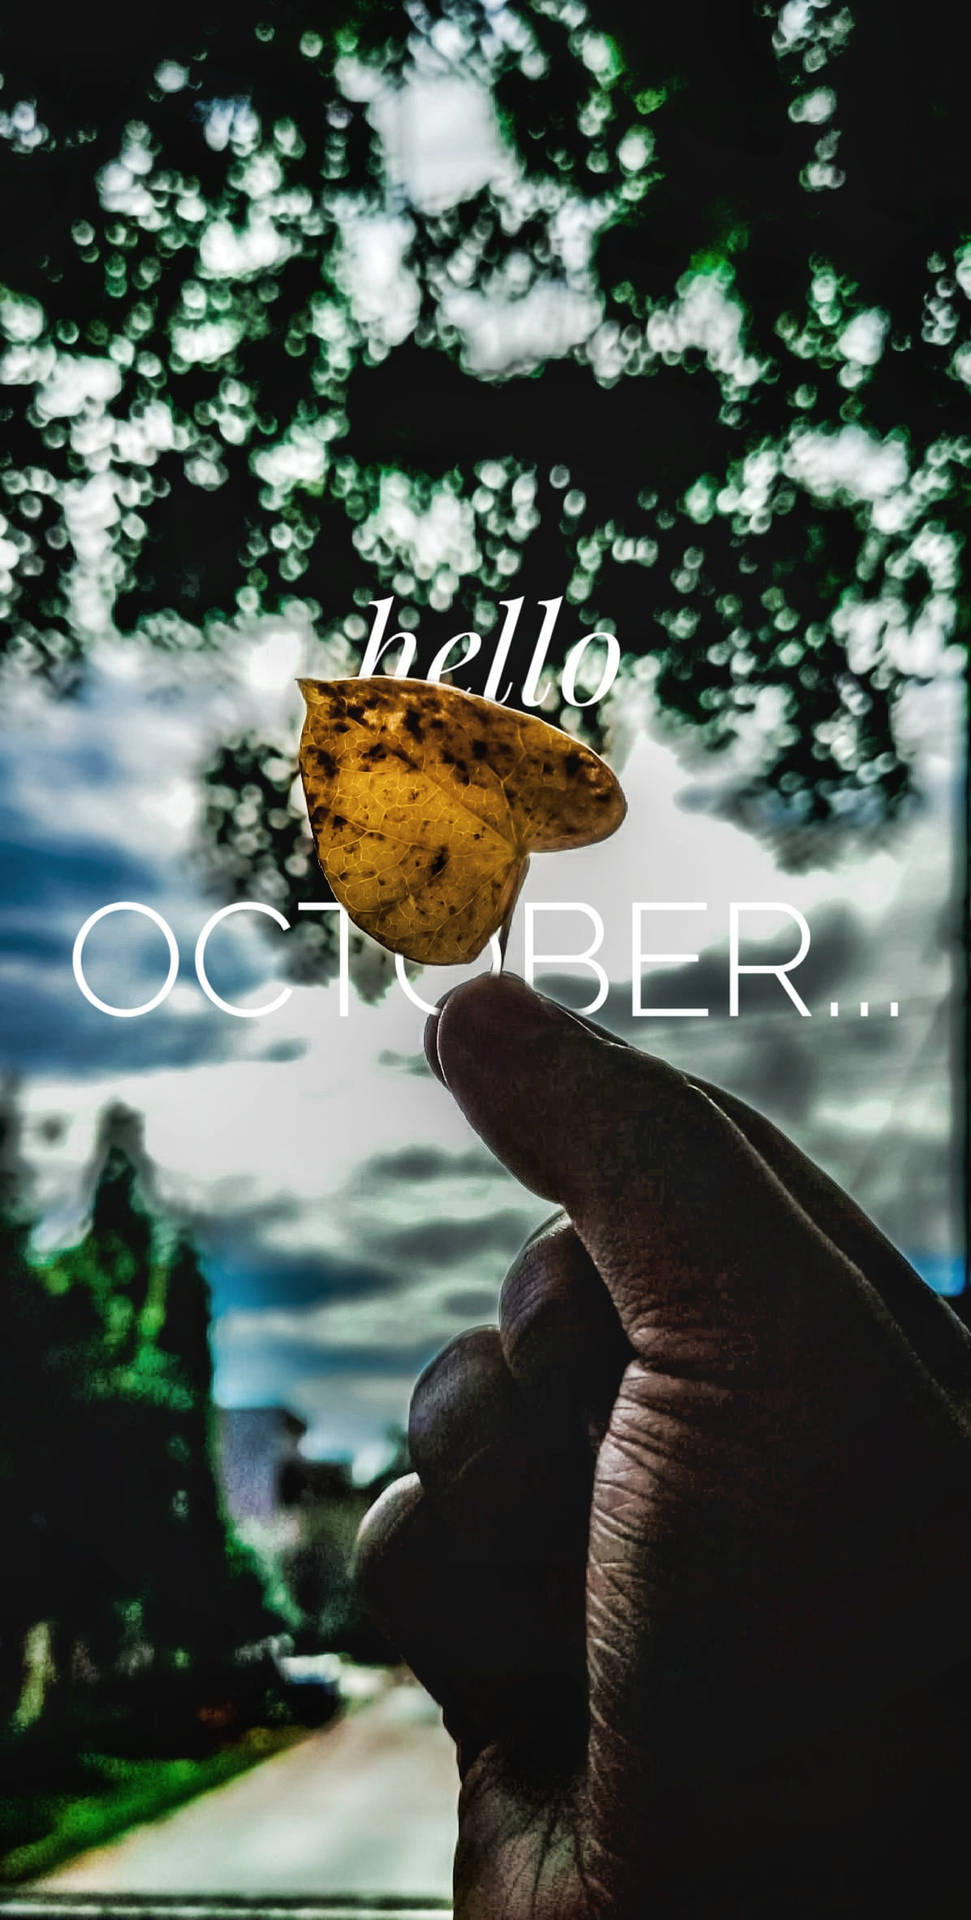 Hand And Leaf Silhouette Hello October Wallpaper